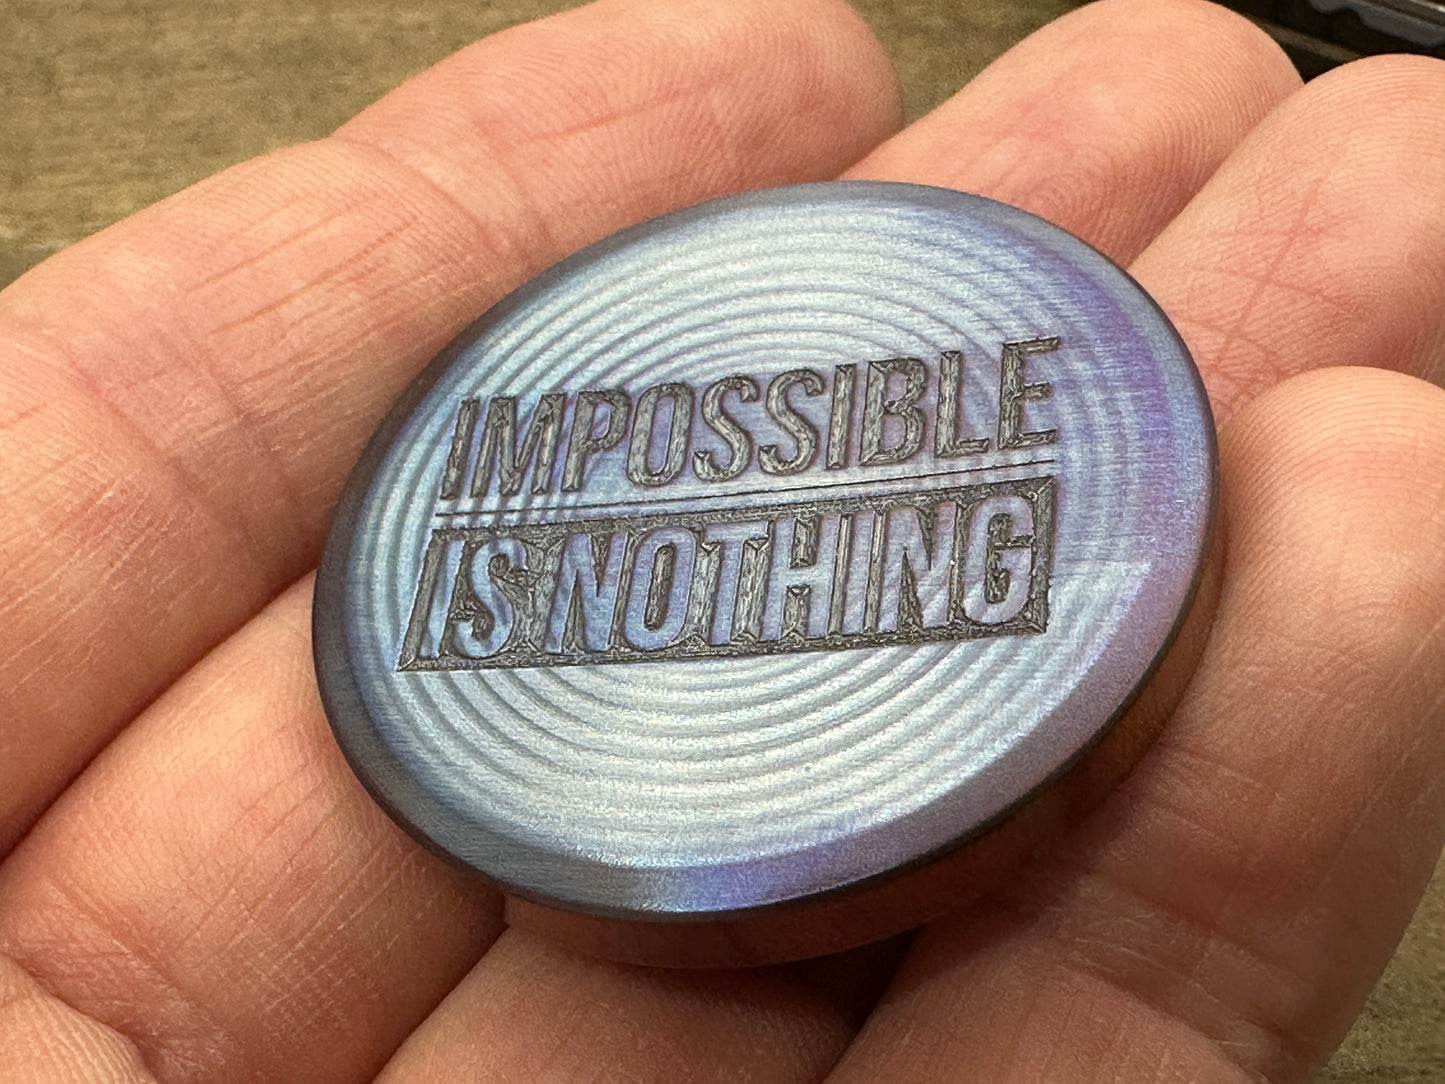 4 Sizes Impossible is Nothing - Flamed Deep engraved Stainless Worry Coin